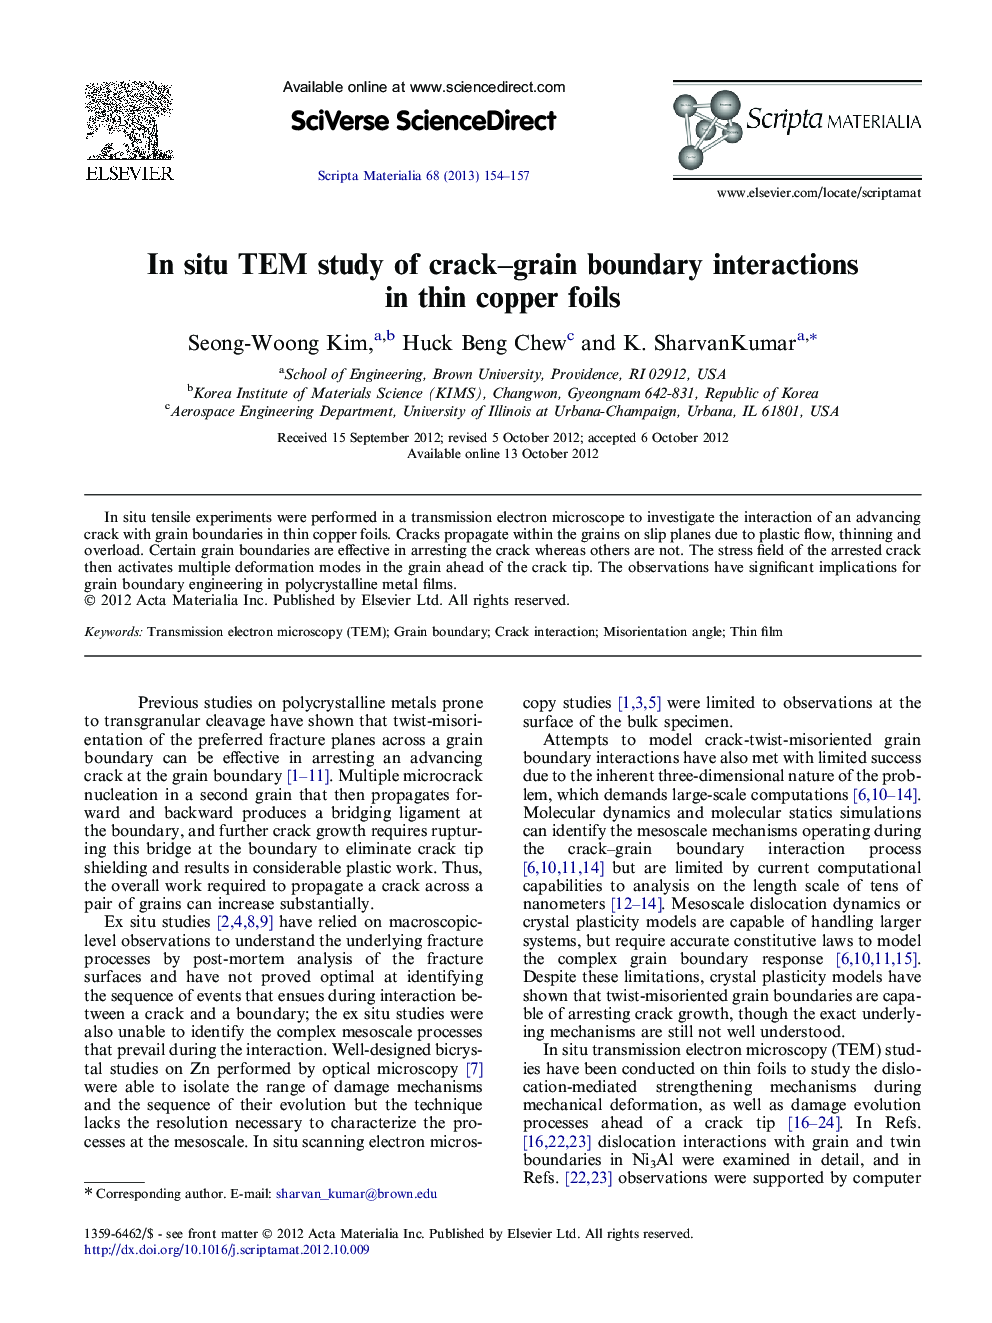 In situ TEM study of crack–grain boundary interactions in thin copper foils